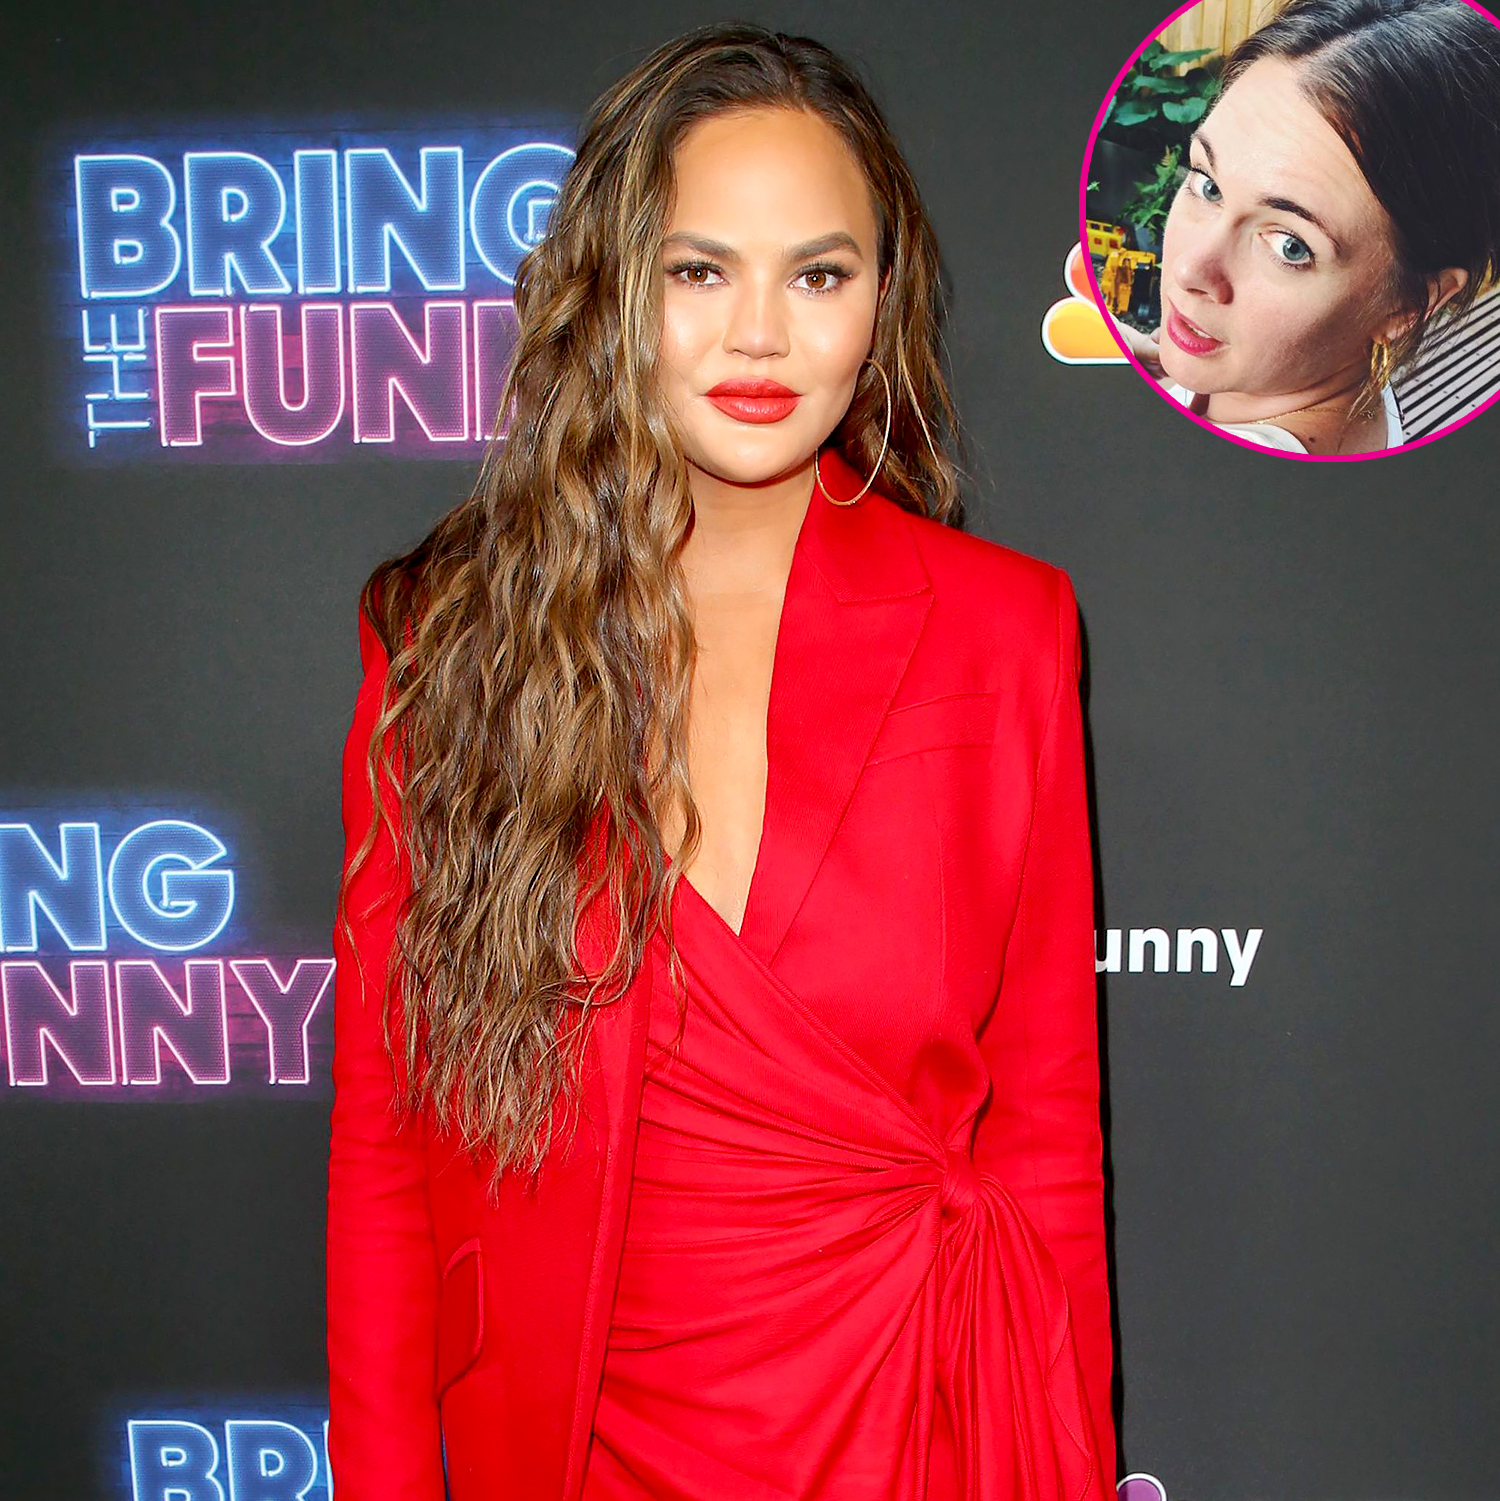 See the Stars Who Defended Chrissy Teigen in the Wake of Alison Roman Feud